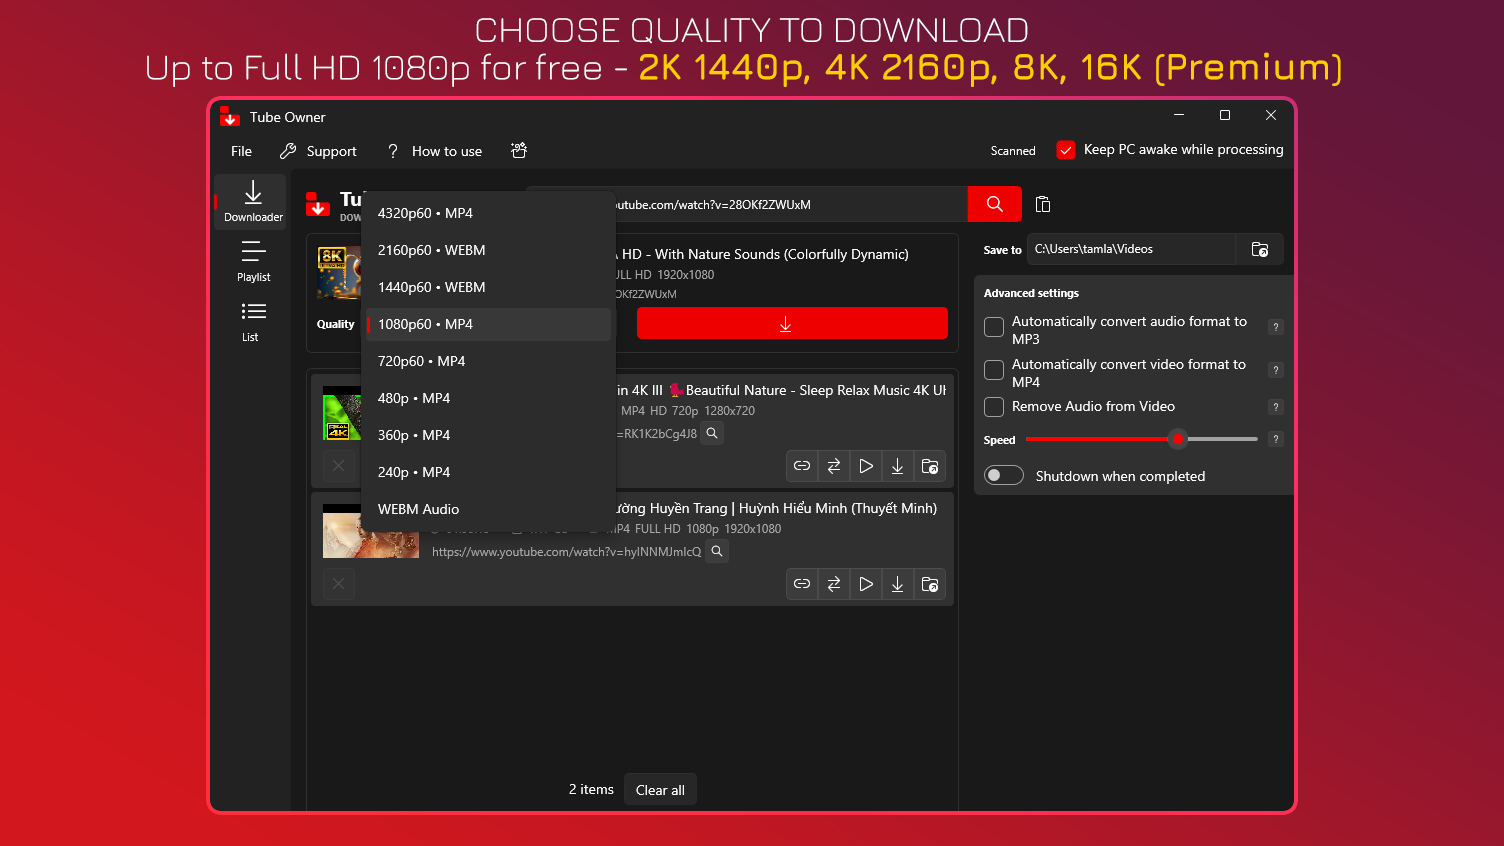 Choose Quality To Download - Up to Full HD 1080p for free - 2K 1440p, 4K 2160p, 8K, 16K (Premium)